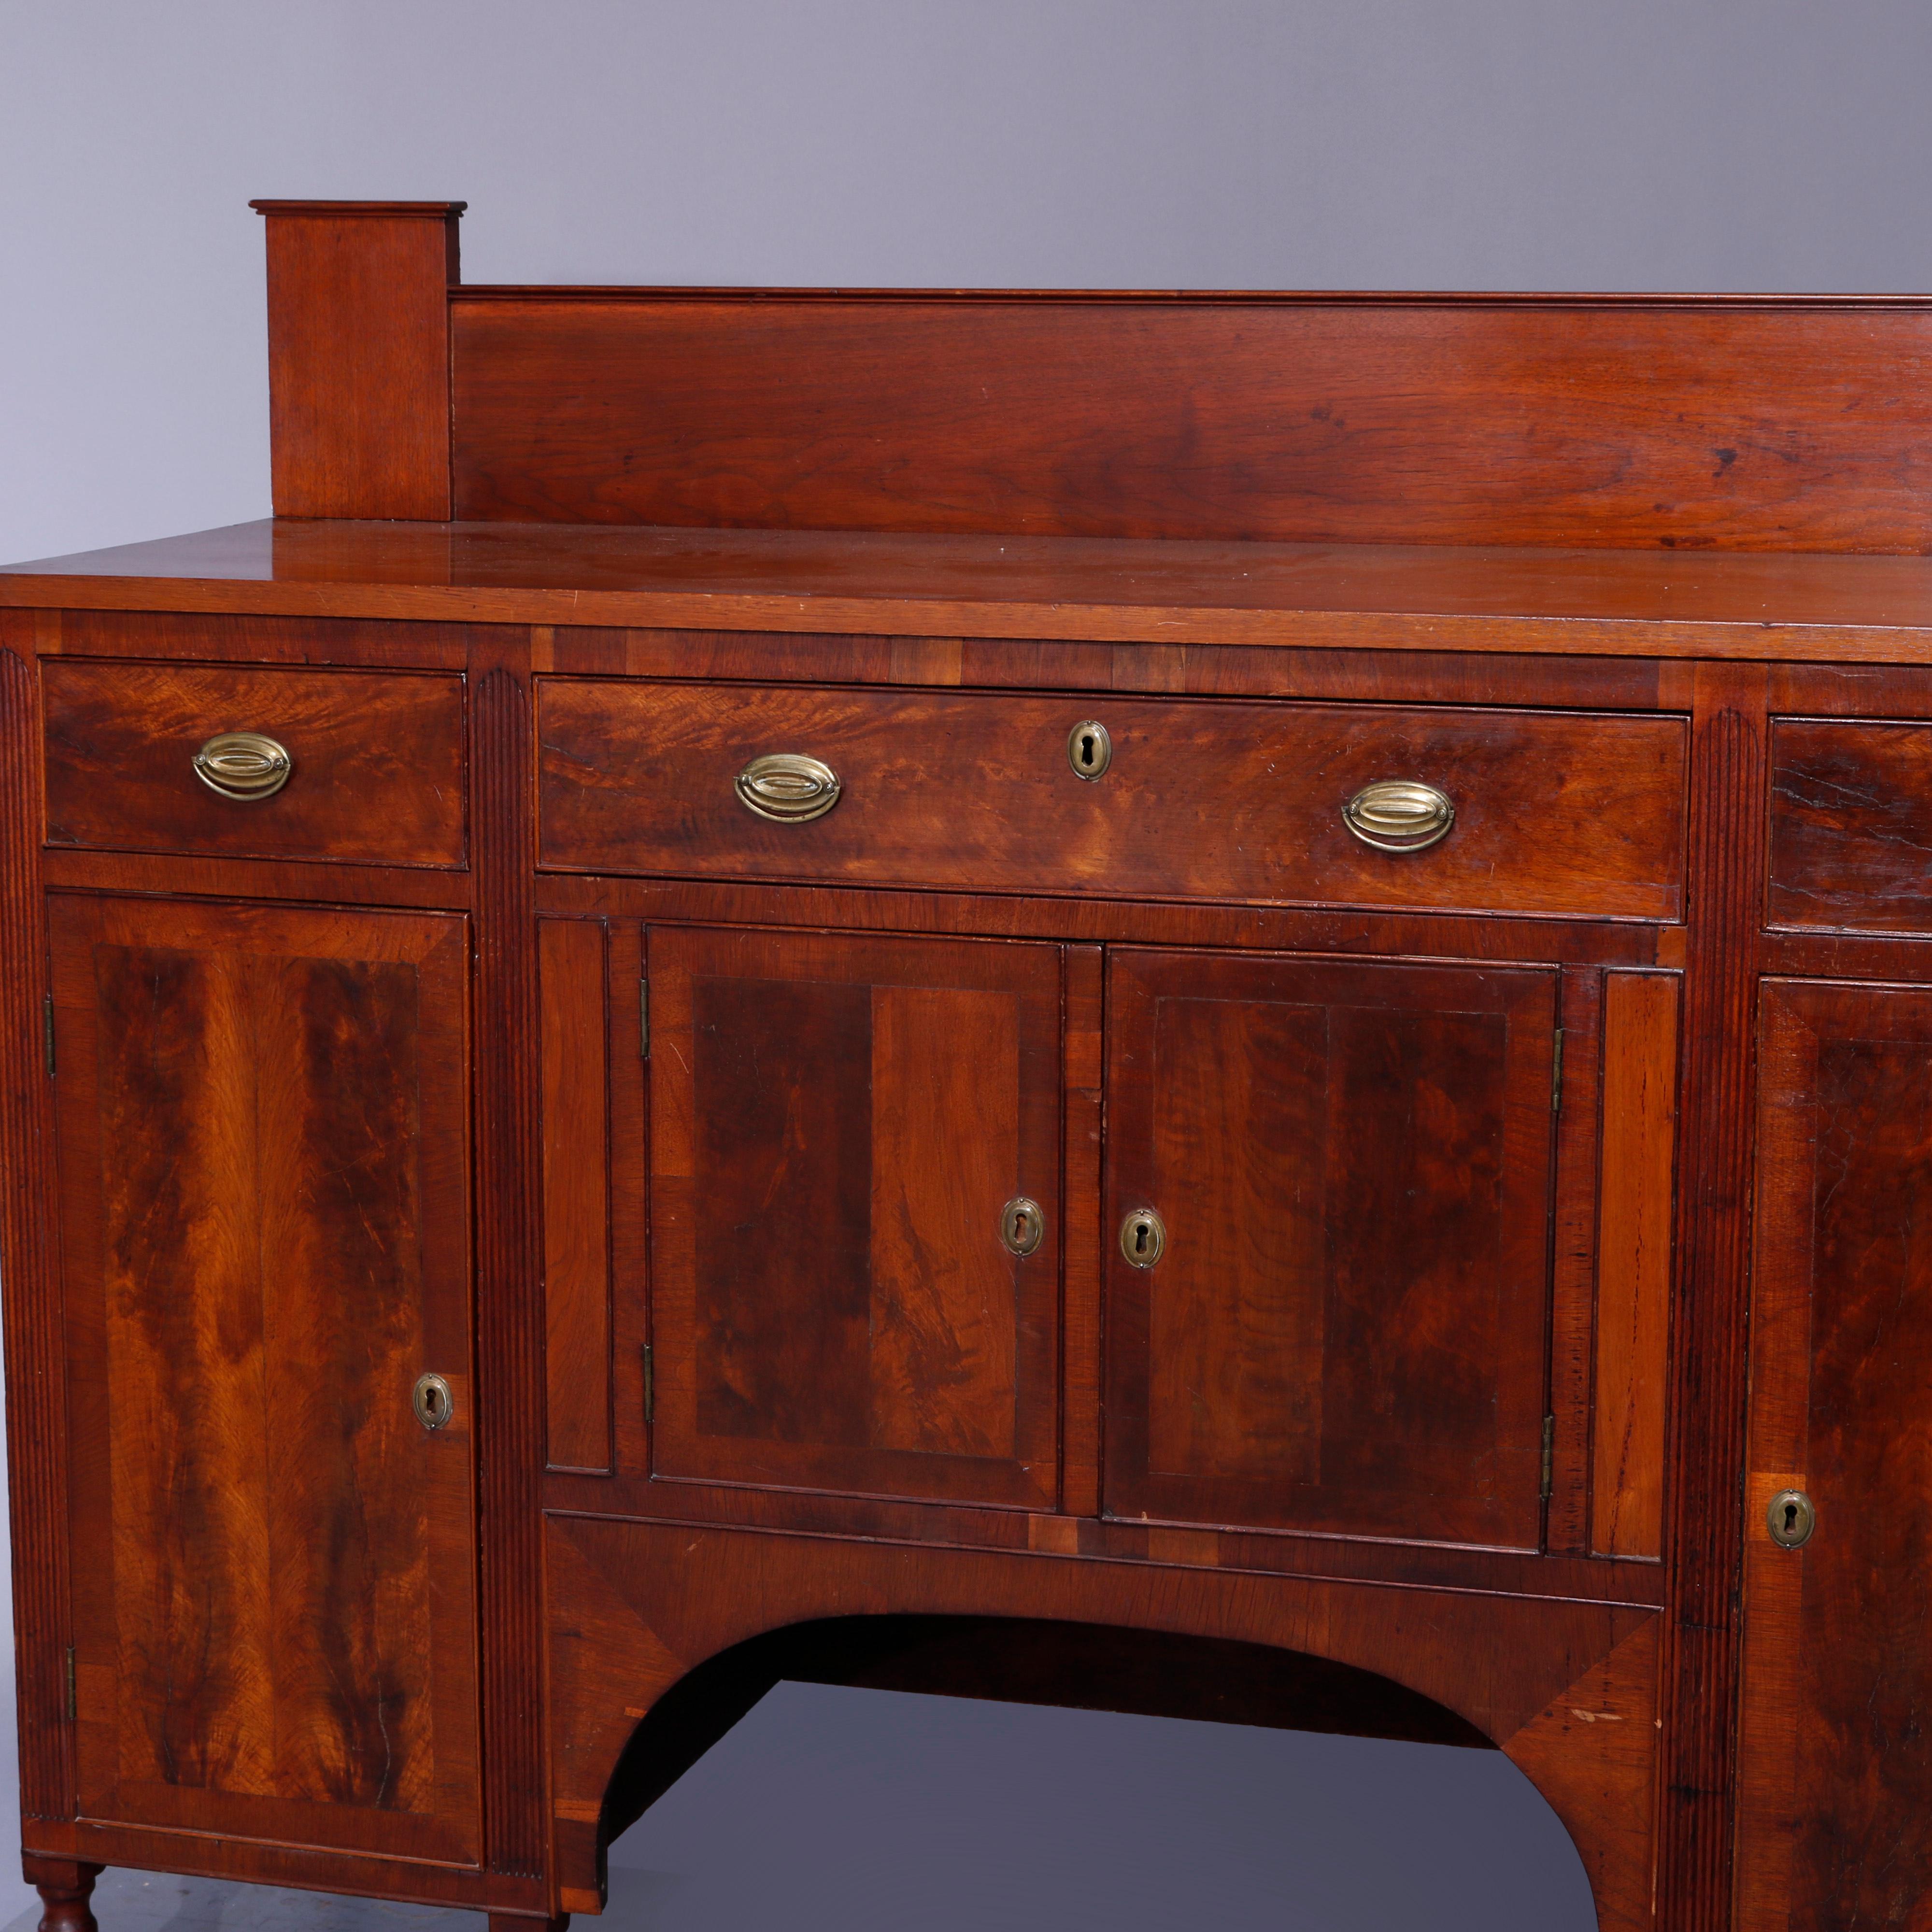 An antique period Sheraton sideboard offers flame mahogany construction with backsplash surmounting case with three upper drawers over lower cabinets having arched skirt, raised on turned legs, c1830

Measures: 52.5